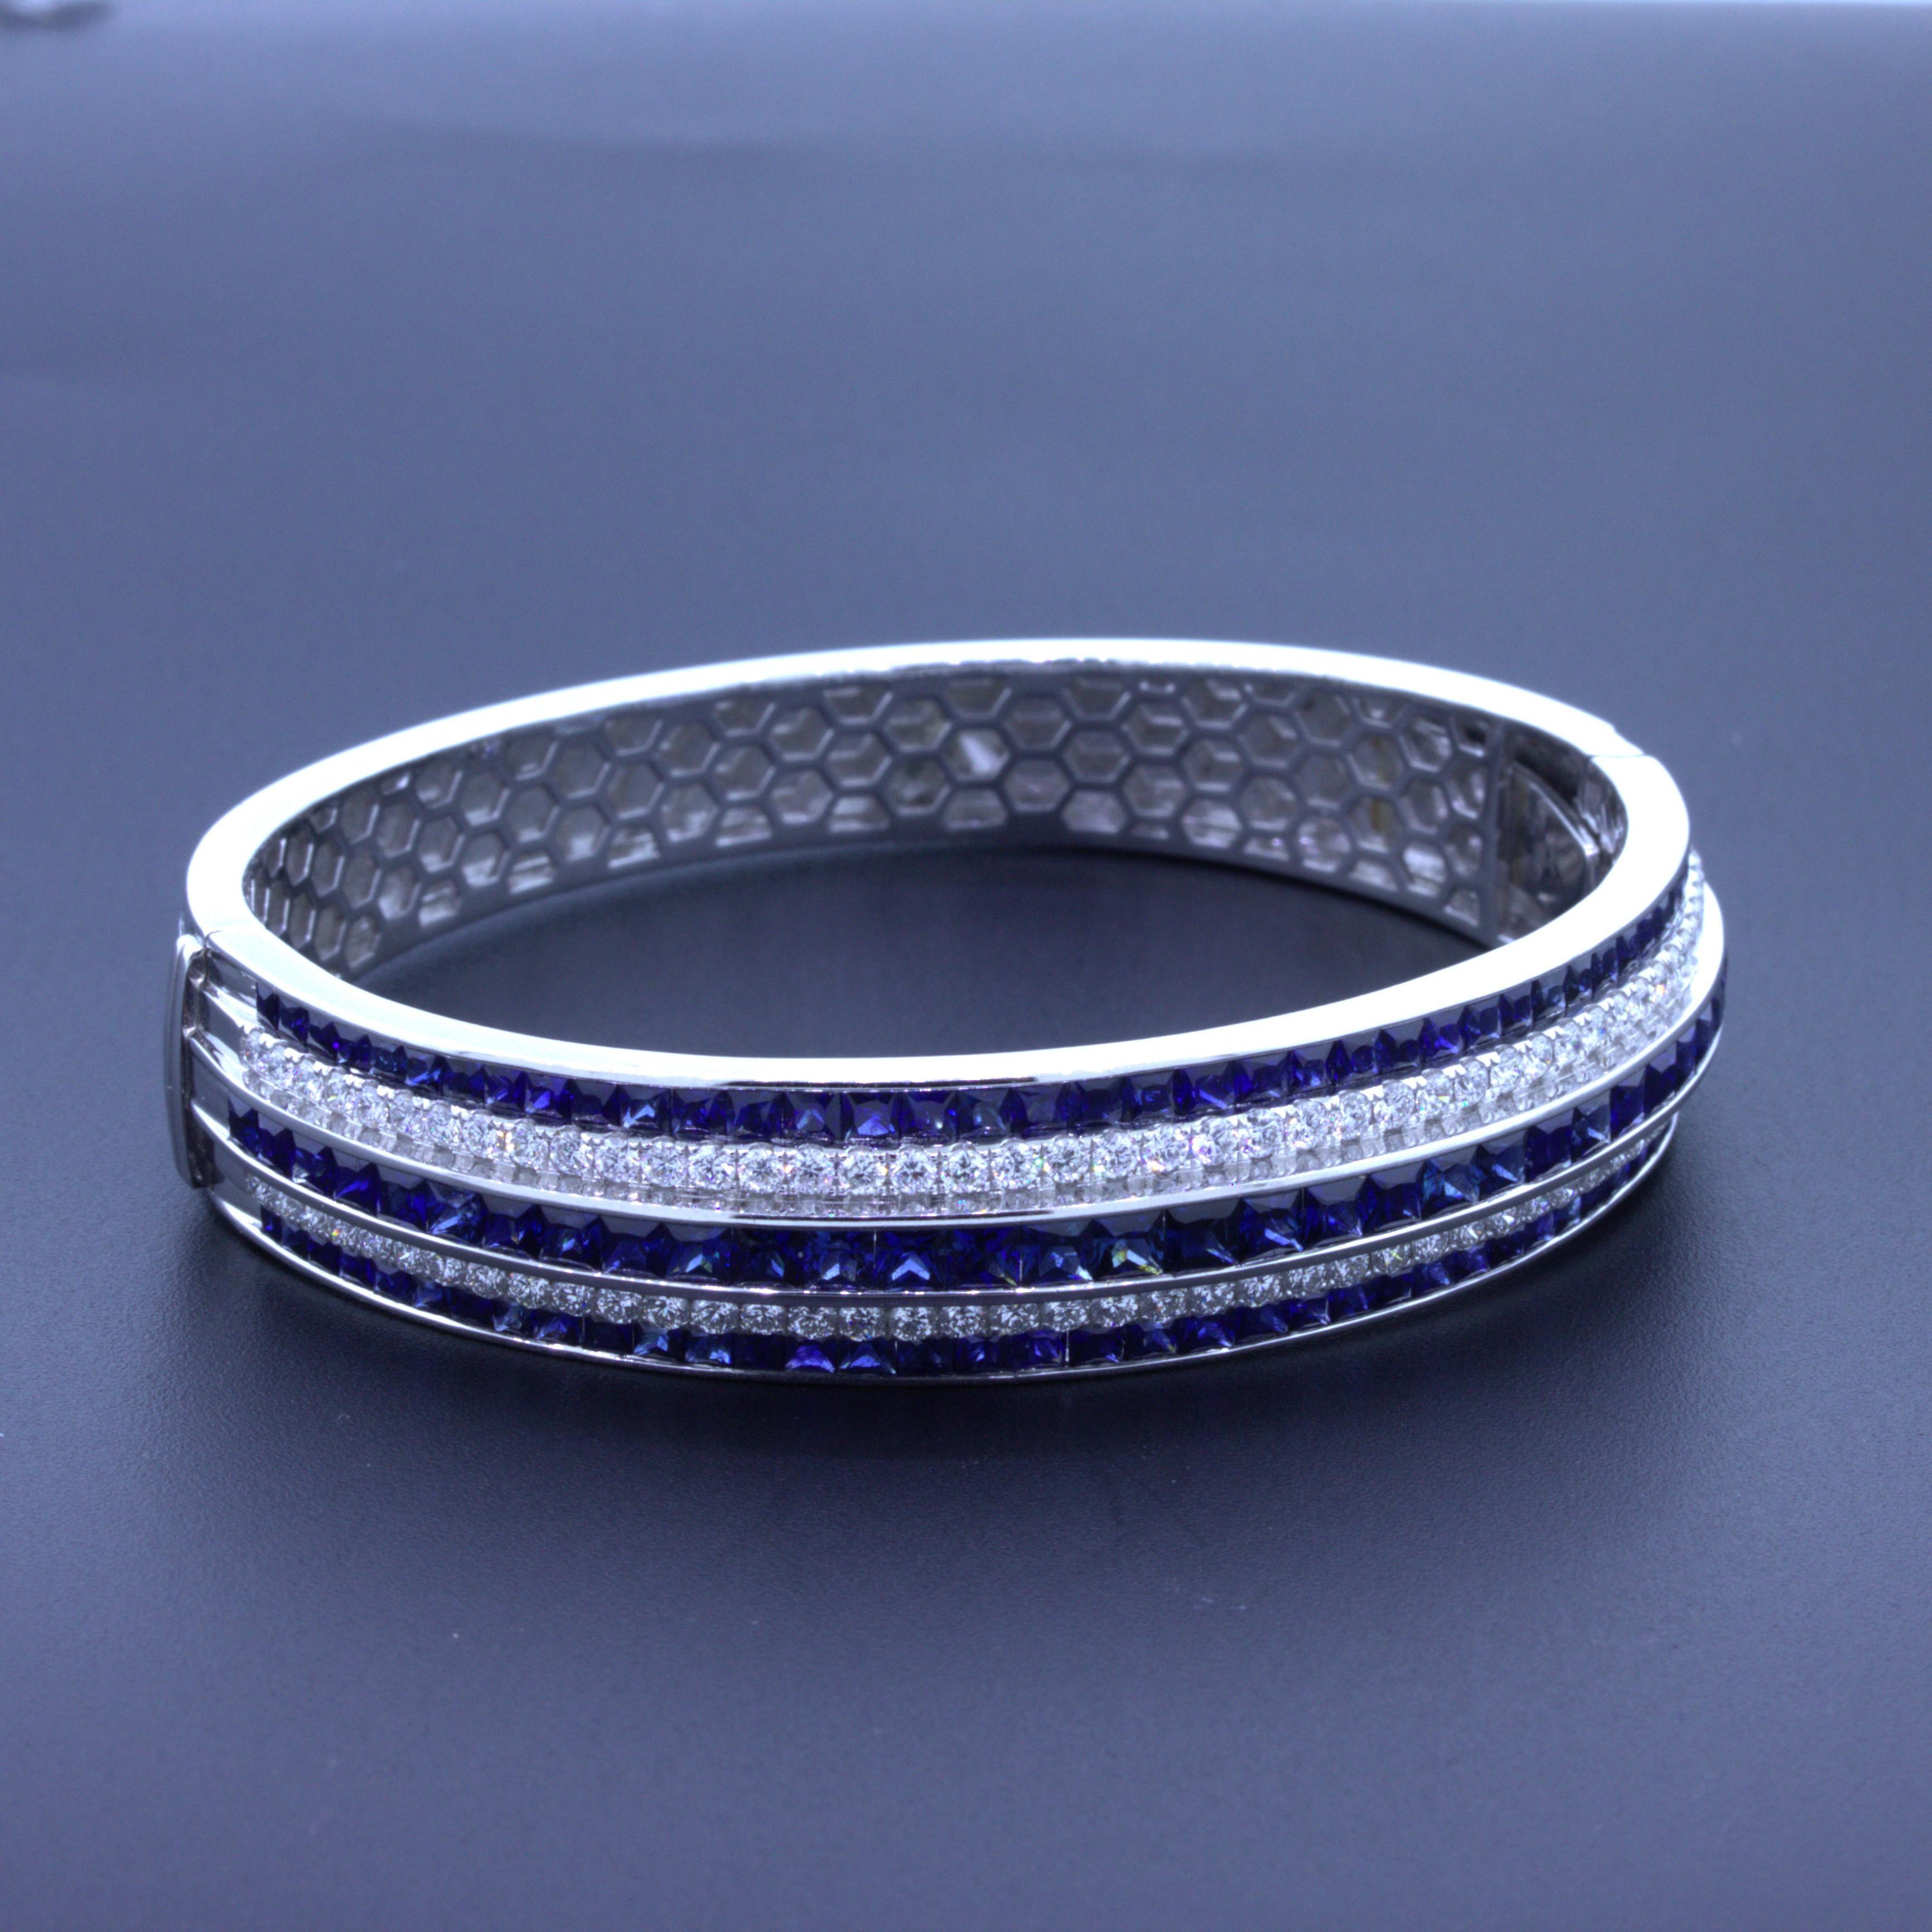 A chic and elegant 18k white gold bangle. It features 3 rows of square-shape blue sapphire weighing a total of 9.77 carats. They all have a rich royal blue color that radiates in the light. It is further accented by two rows of round brilliant-cut